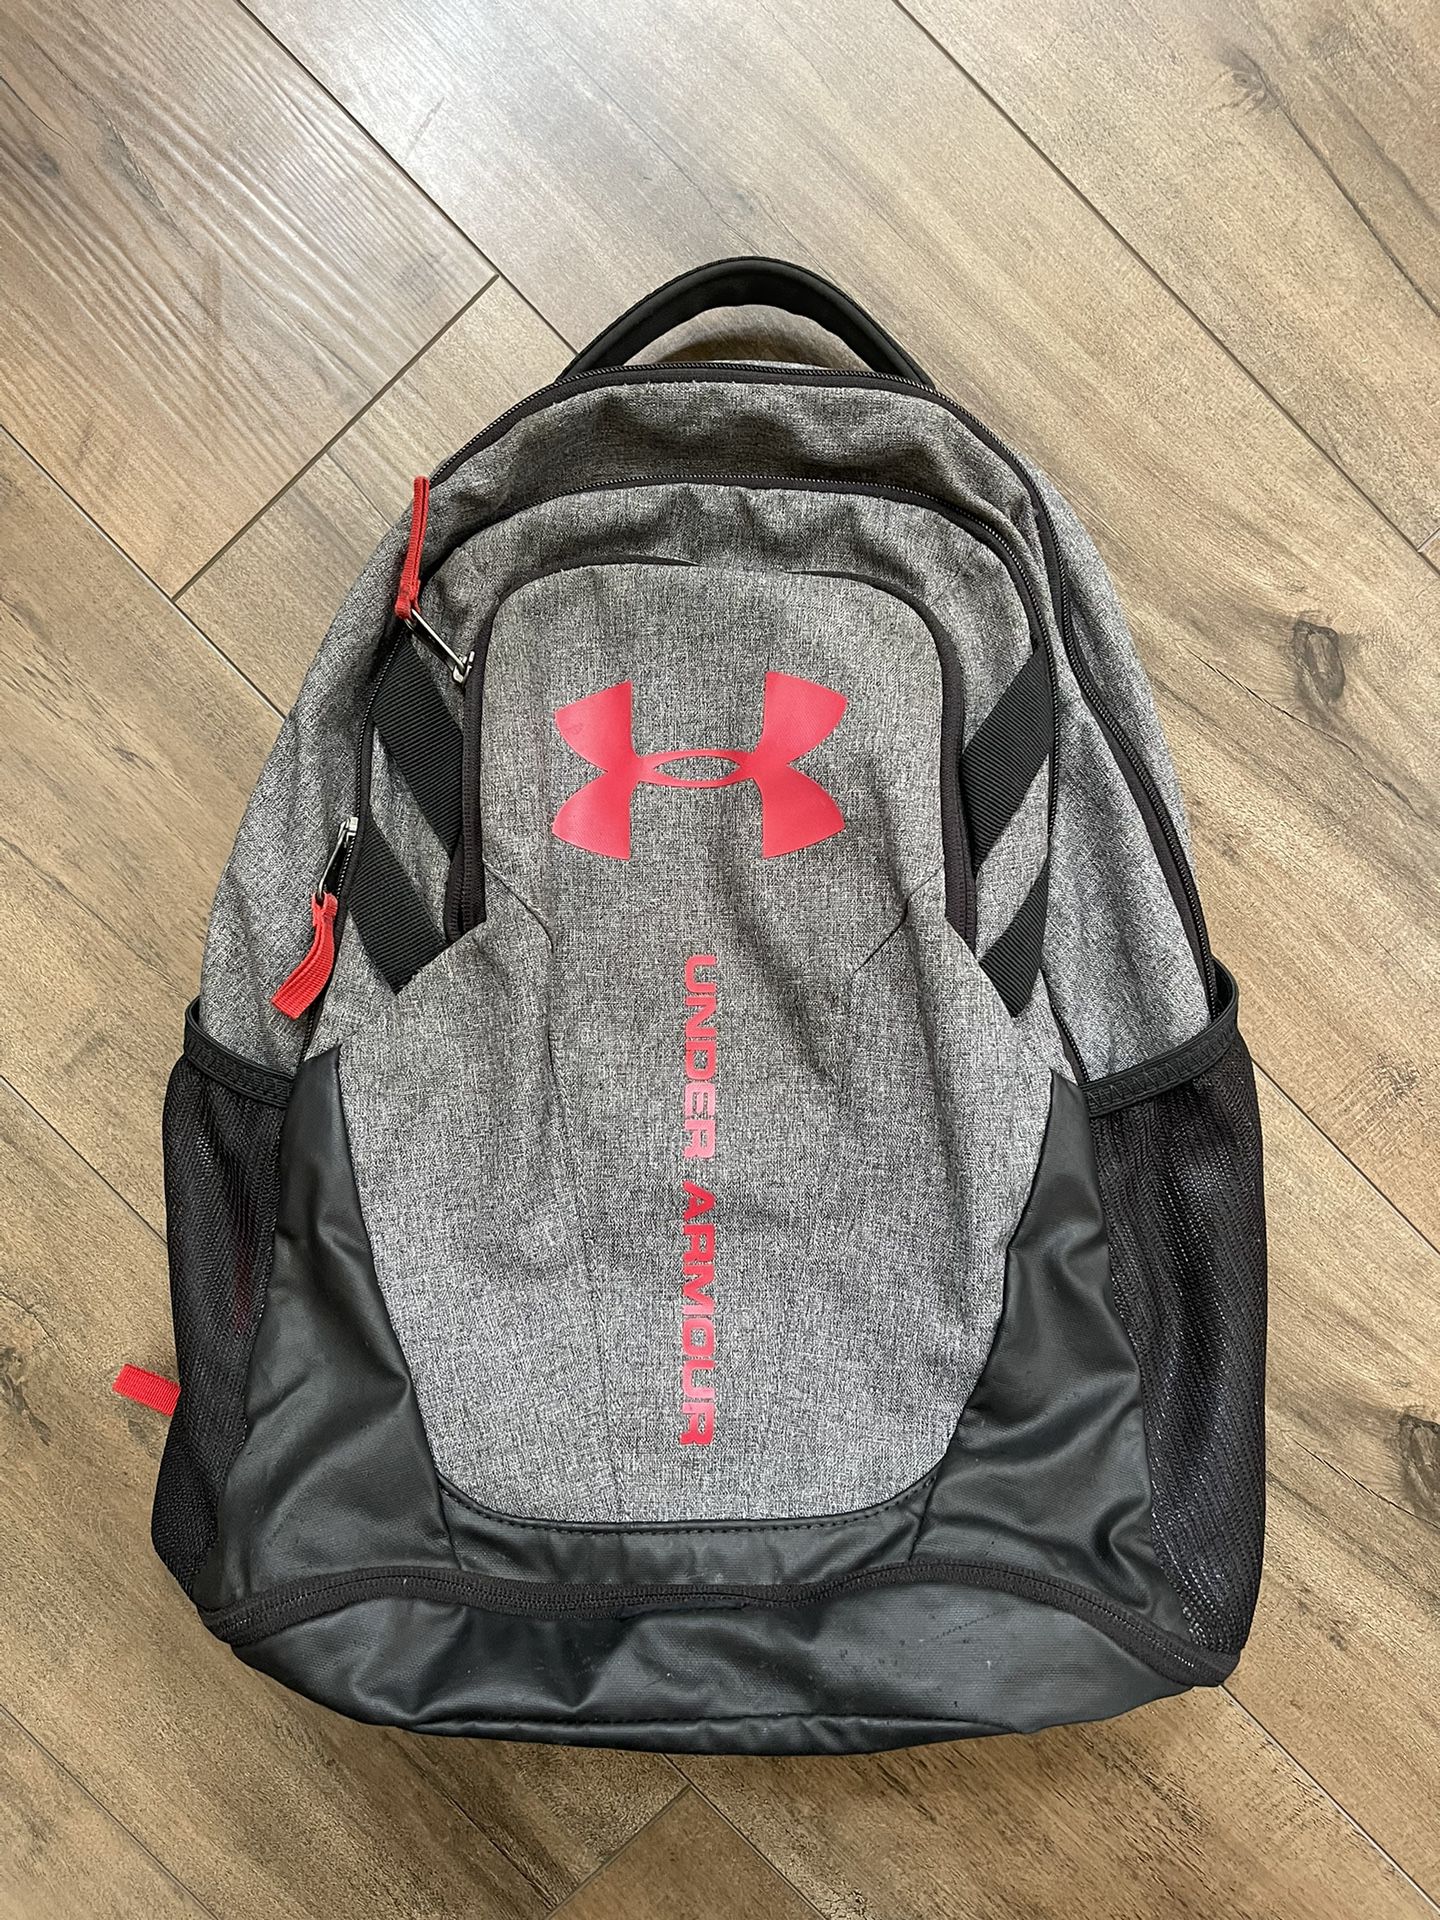 Under Armour Storm Backpack. 